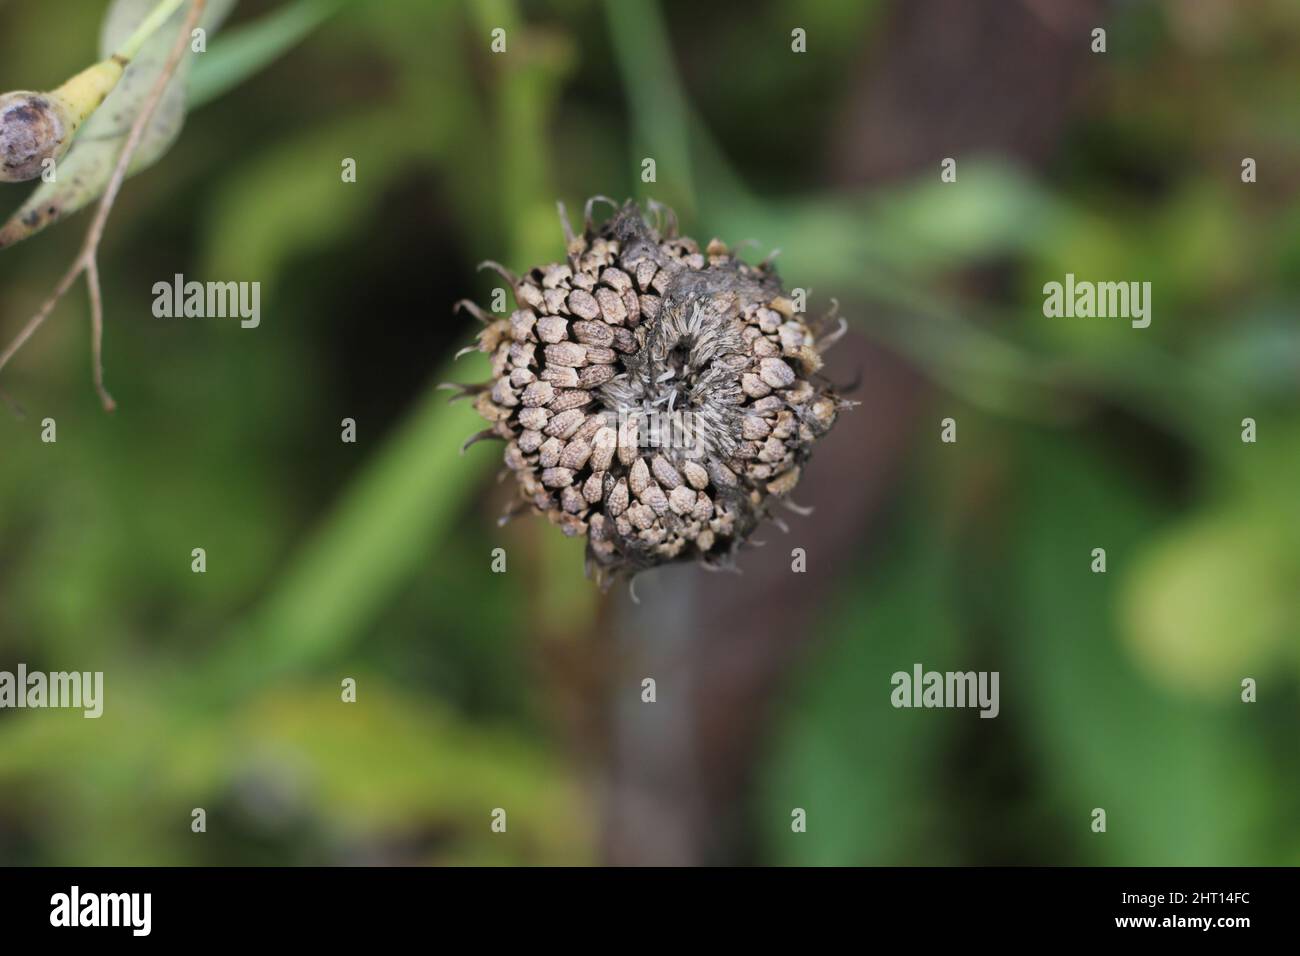 Marigold plant in still formed seed in autumn. Plant forming seed, close up. Stock Photo